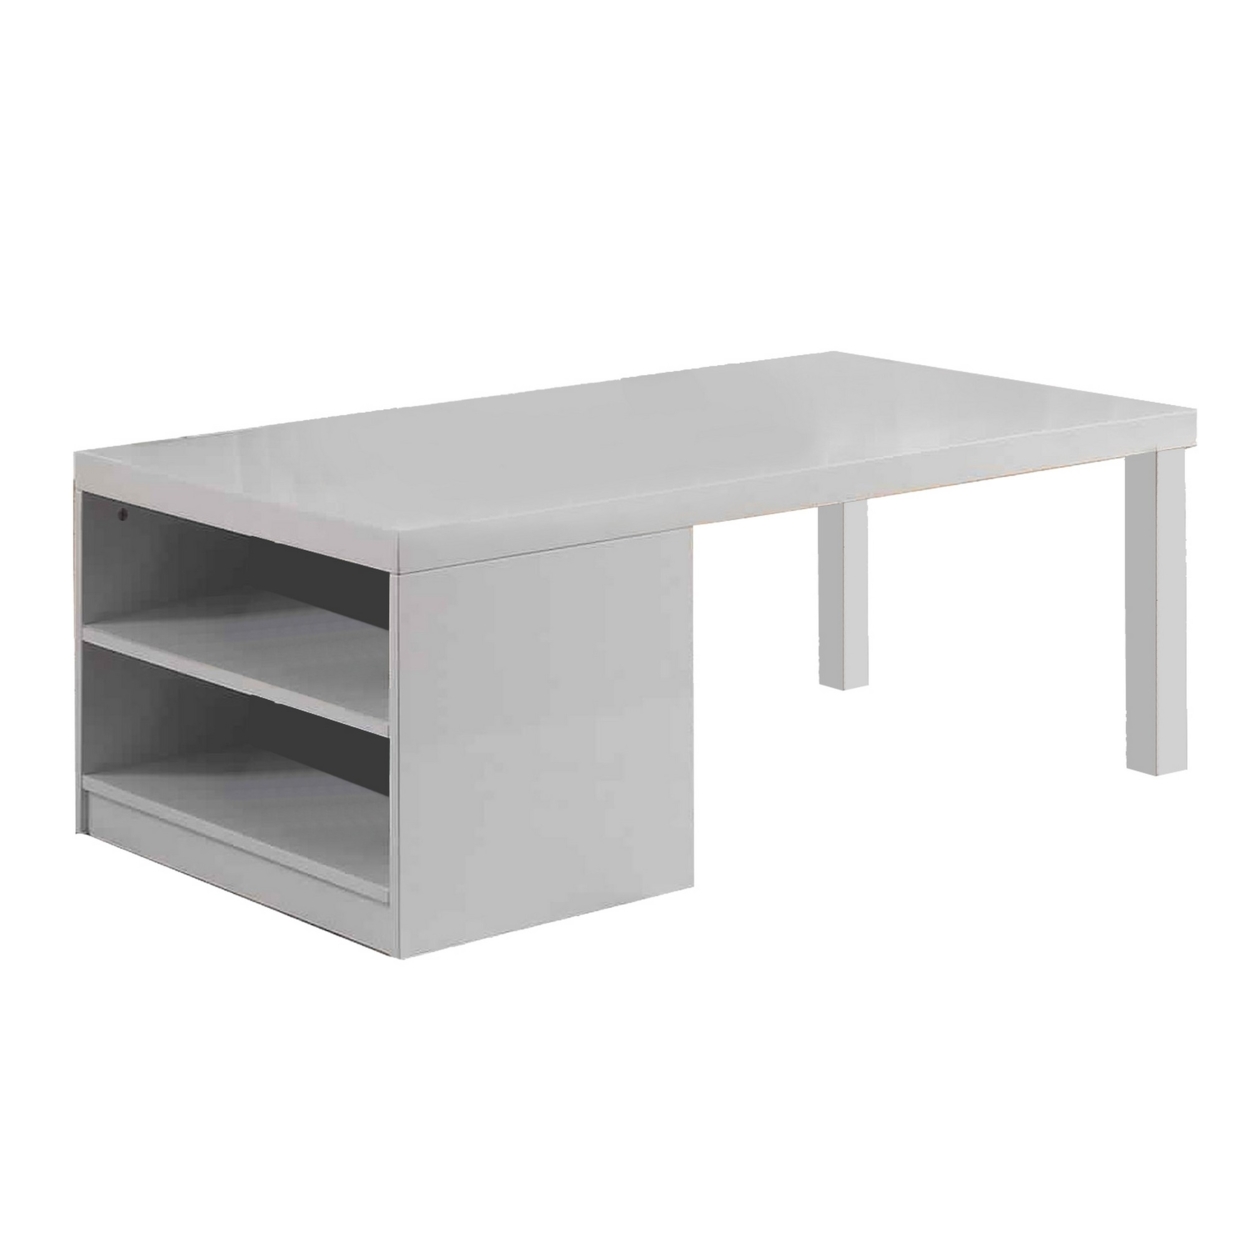 Wood And Metal Frame Coffee Table With Open Shelves, White And Chrome- Saltoro Sherpi